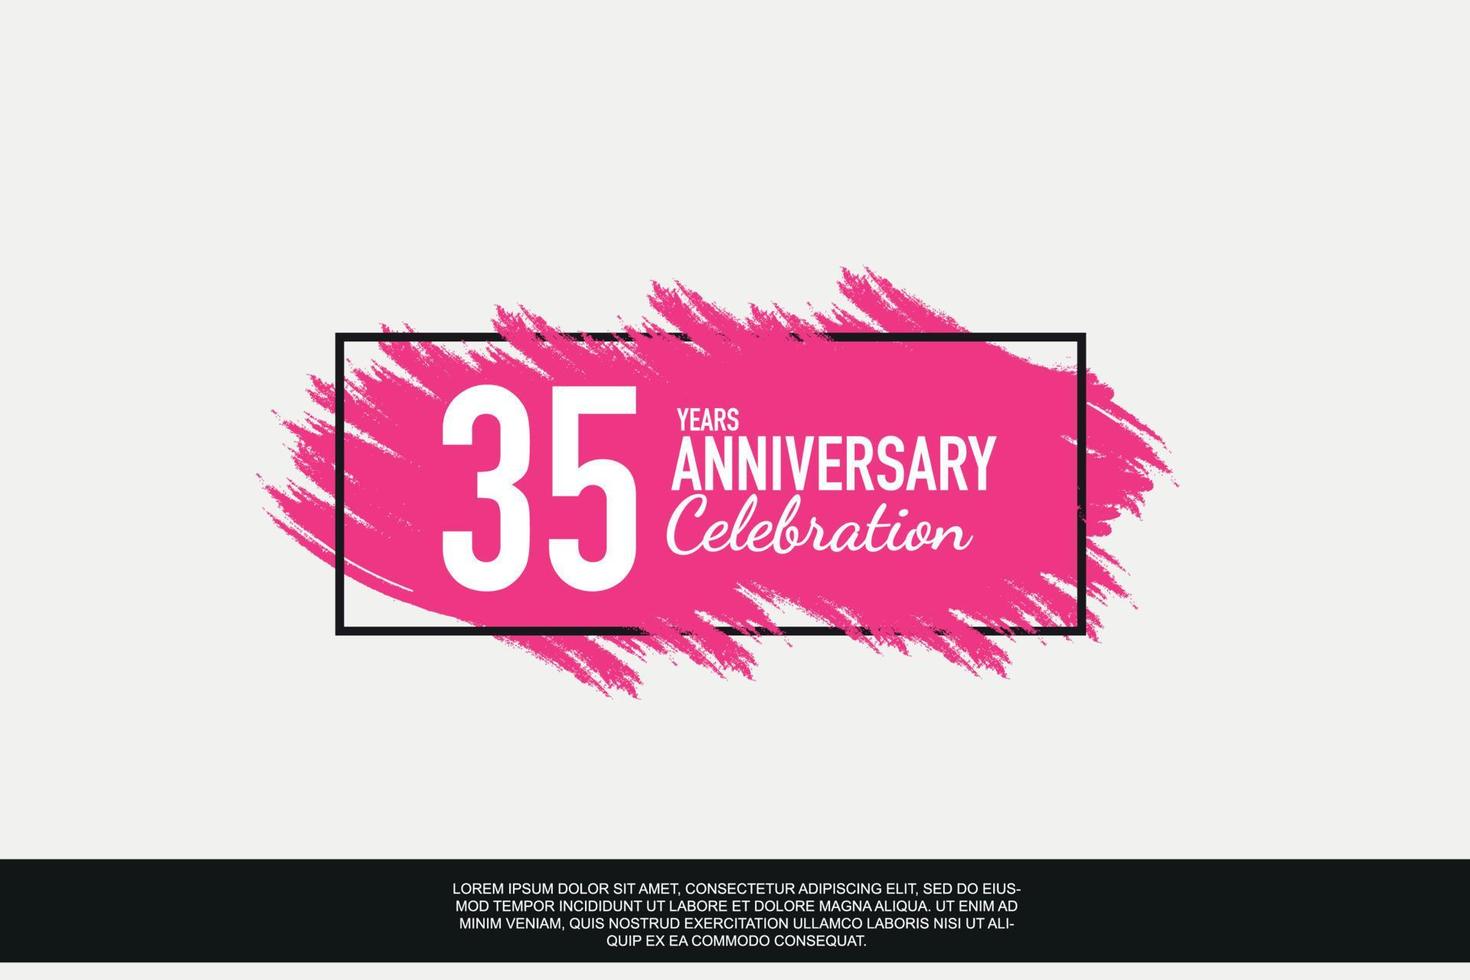 35 year anniversary celebration vector pink design in black frame on white background abstract illustration logo